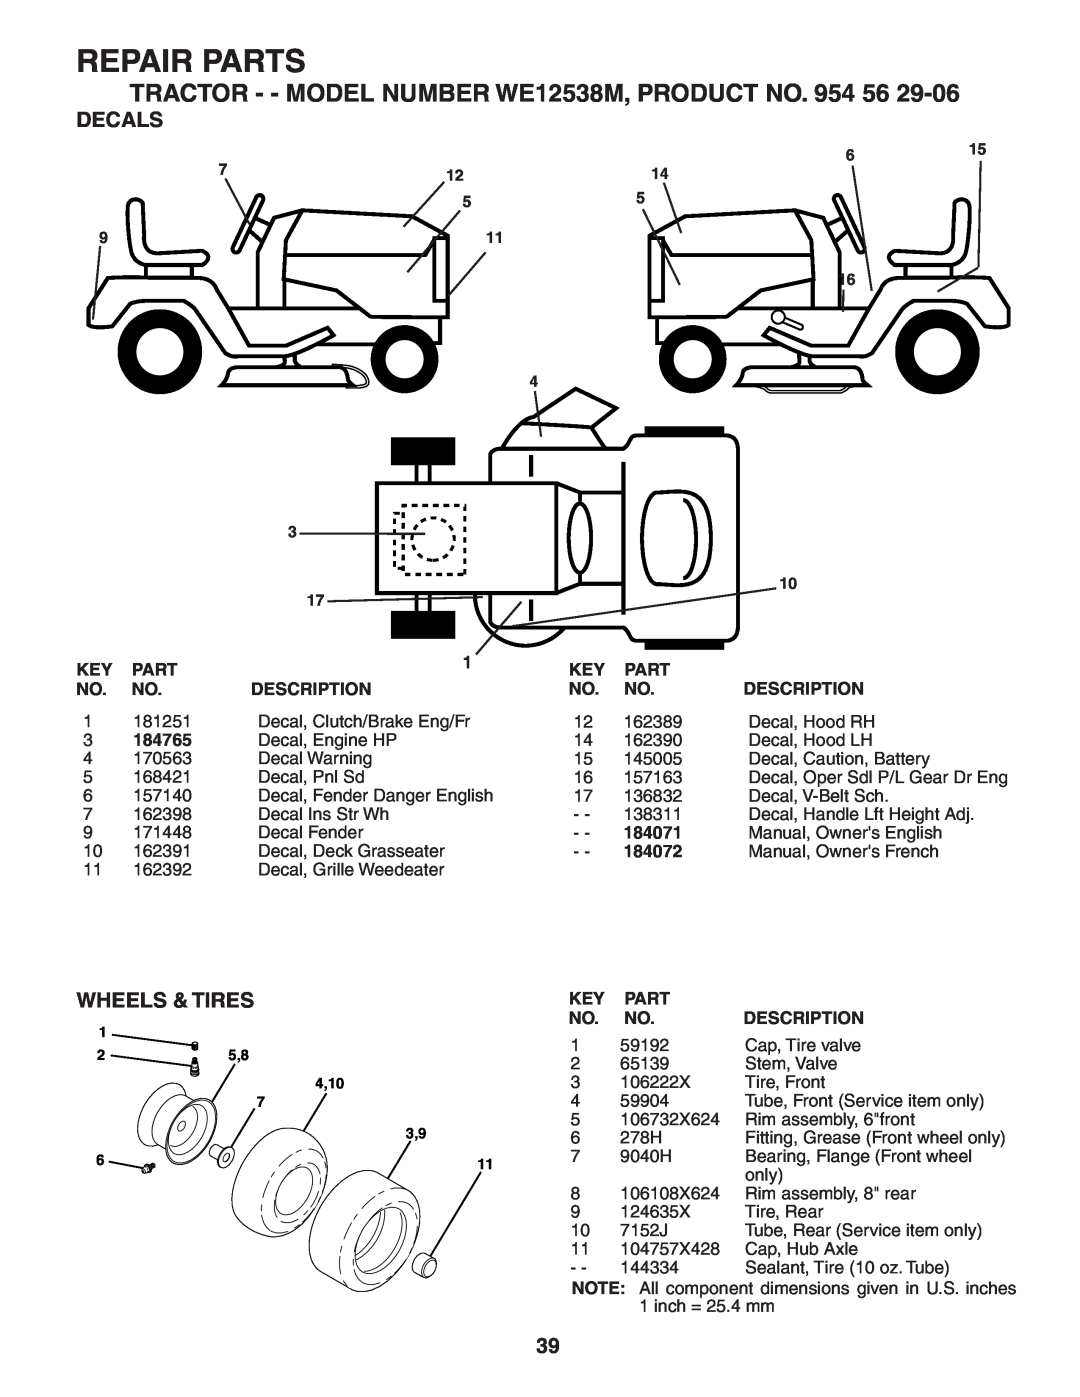 Weed Eater Decals, Wheels & Tires, Repair Parts, TRACTOR - - MODEL NUMBER WE12538M, PRODUCT NO. 954 56, Description 